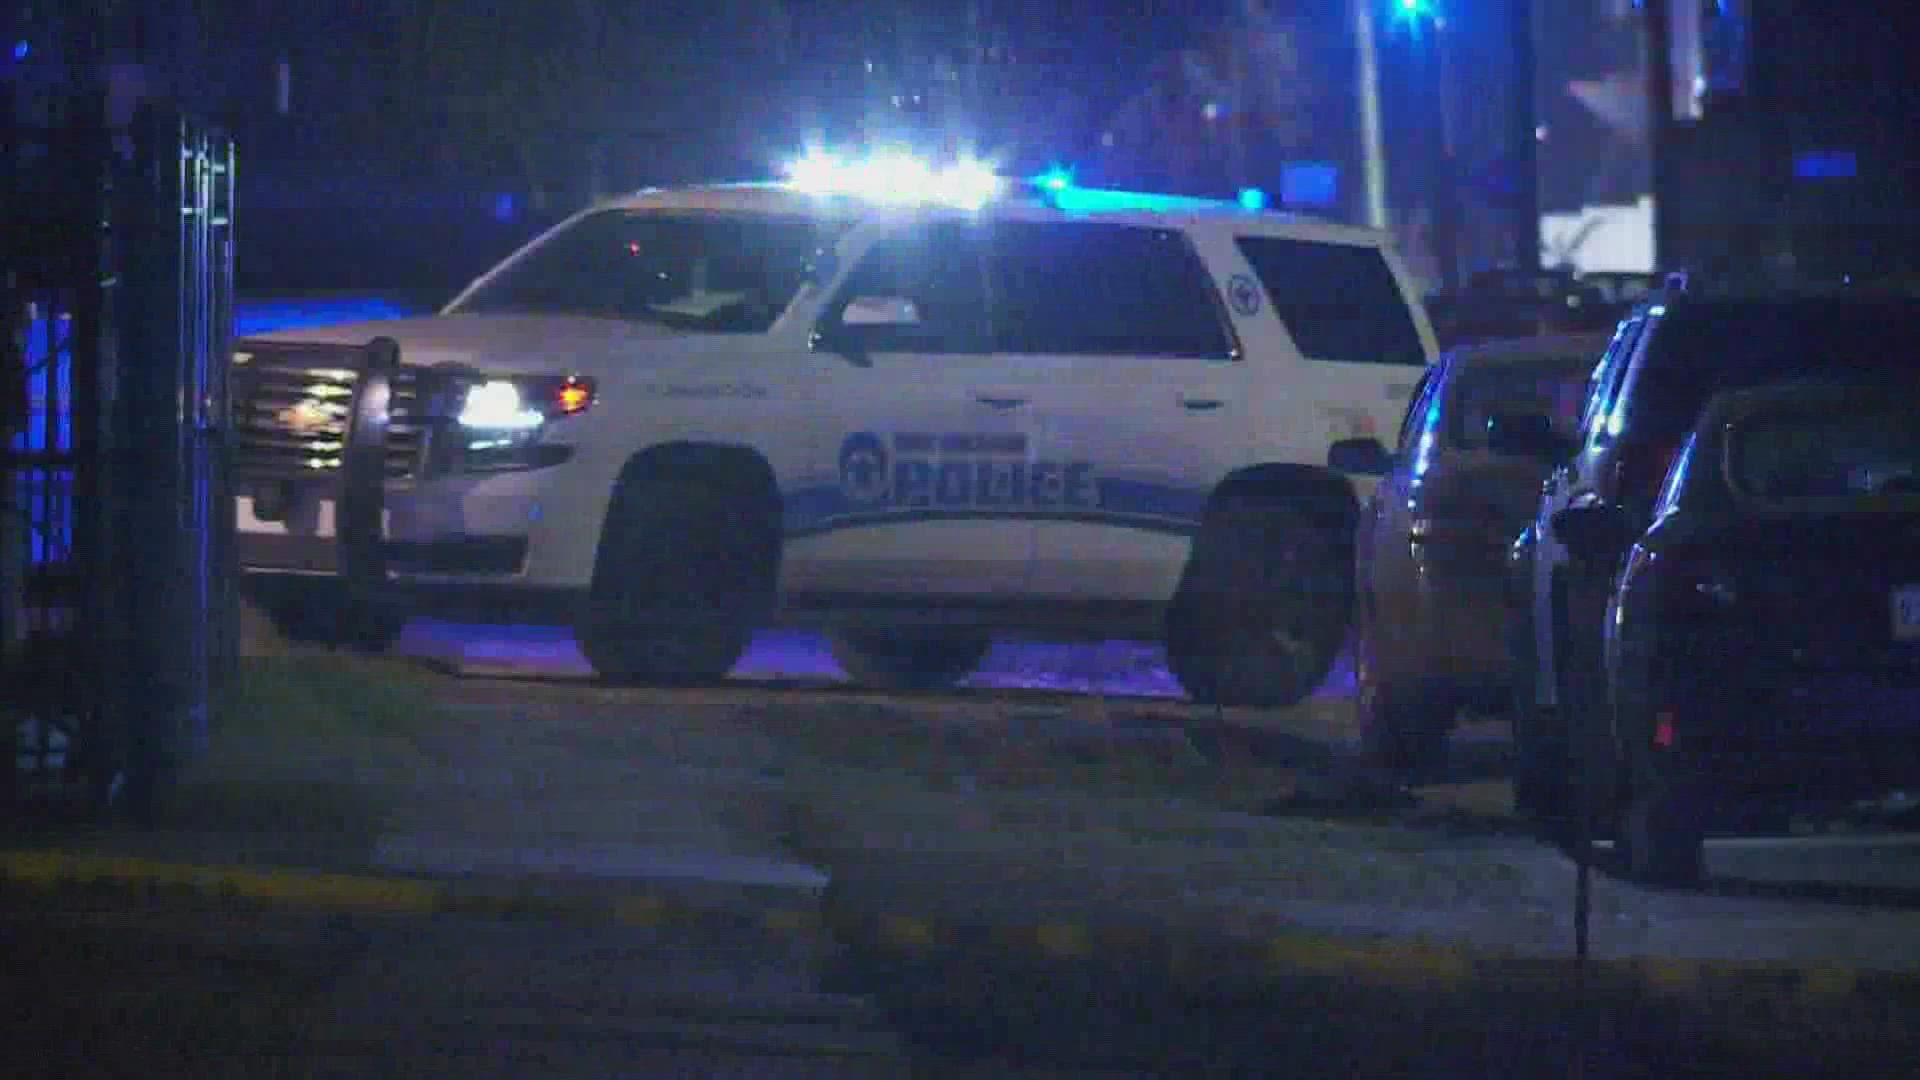 Police responded to the scene where a boy was shot and taken to the hospital in the Lower Ninth Ward.